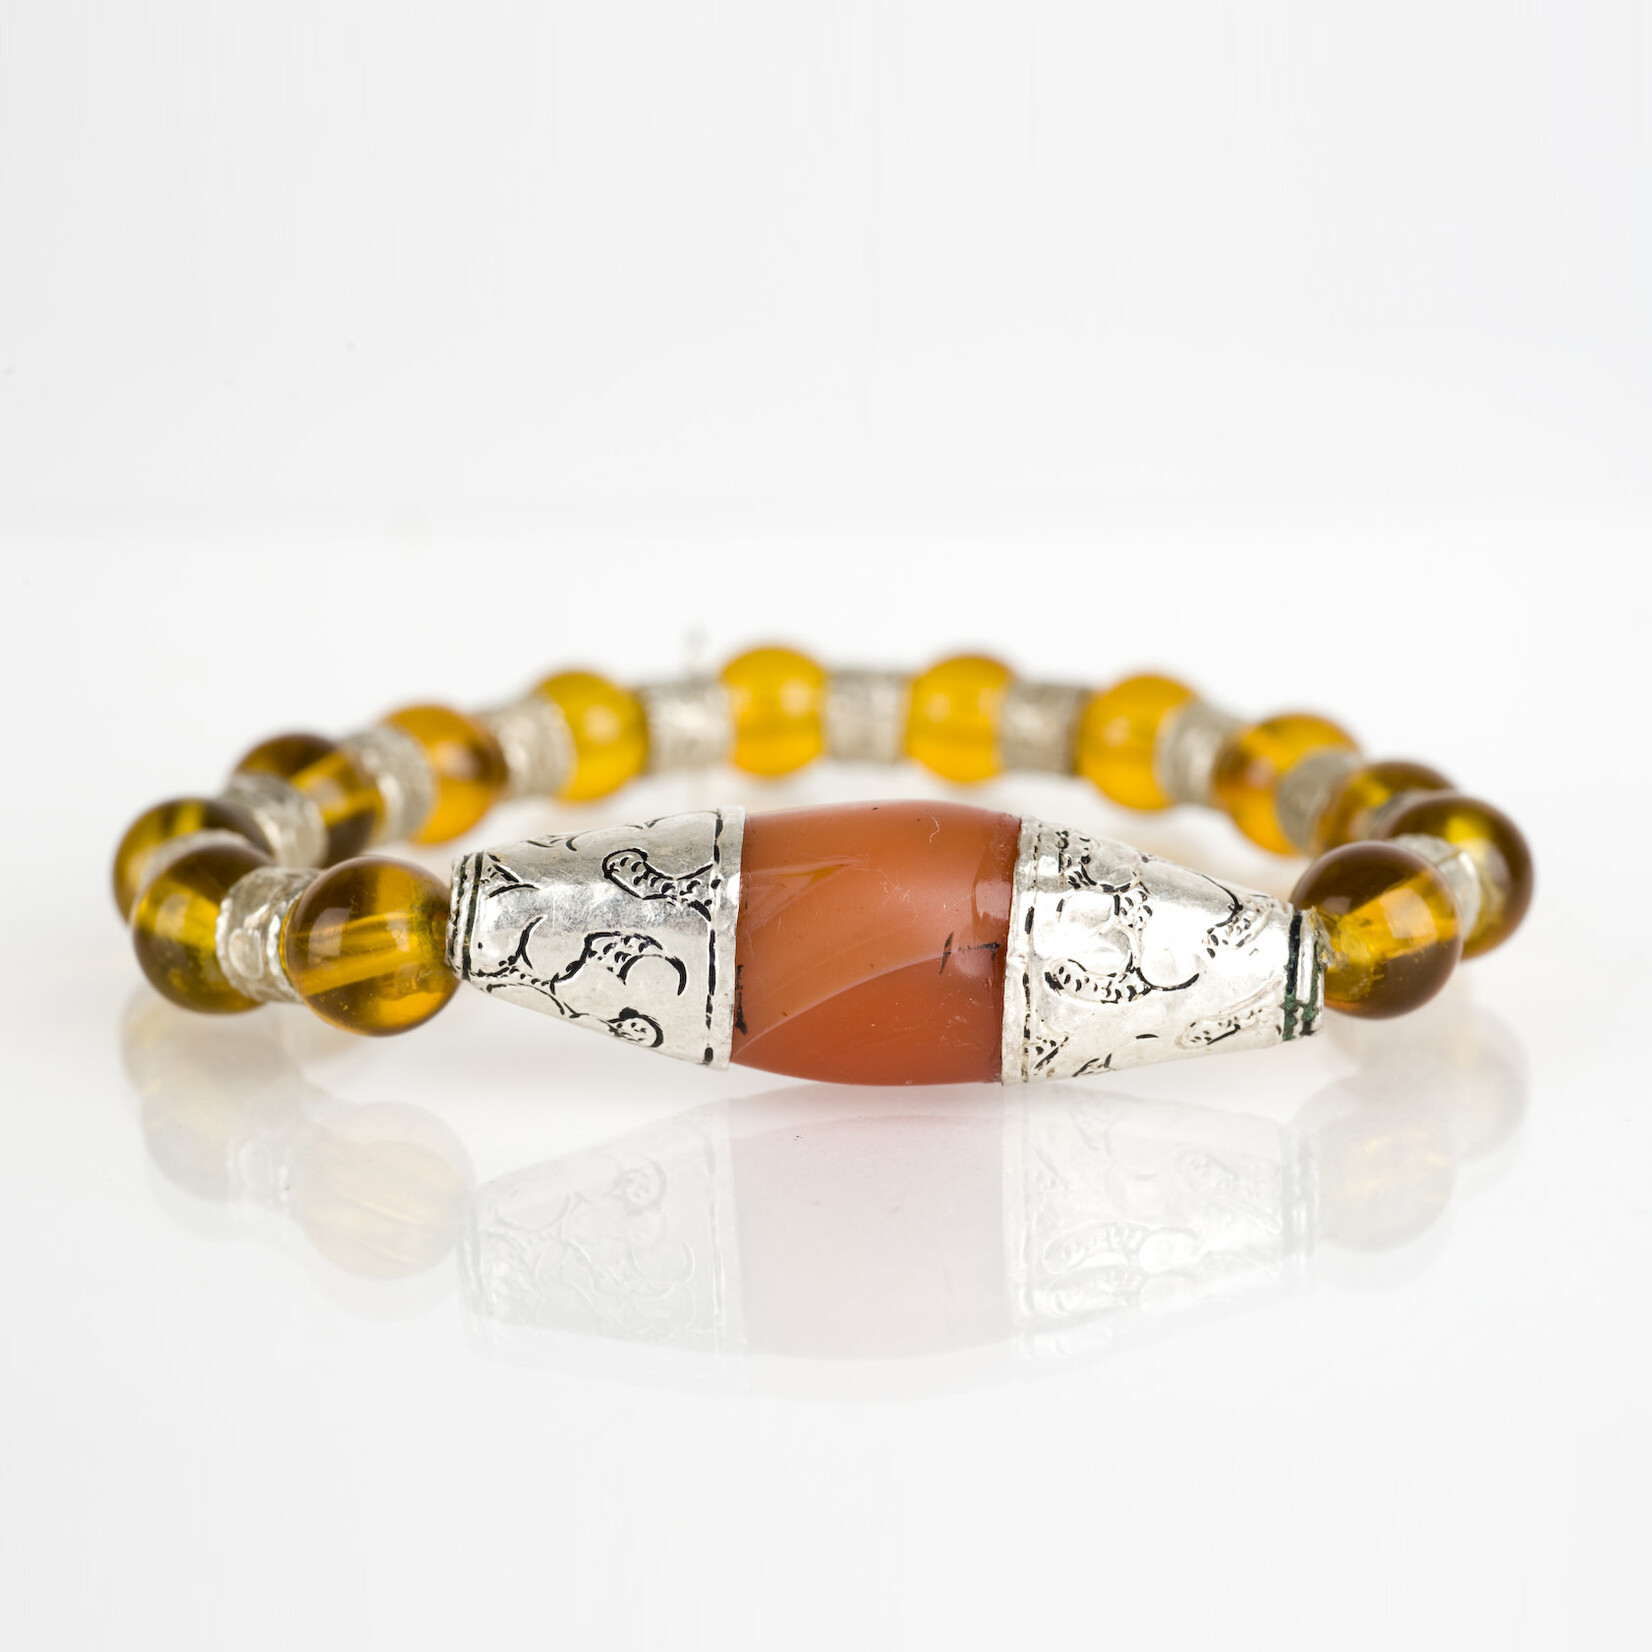 Mina Danielle Tibetan Amber with Oblong Silver and Amber Inlaid Bead